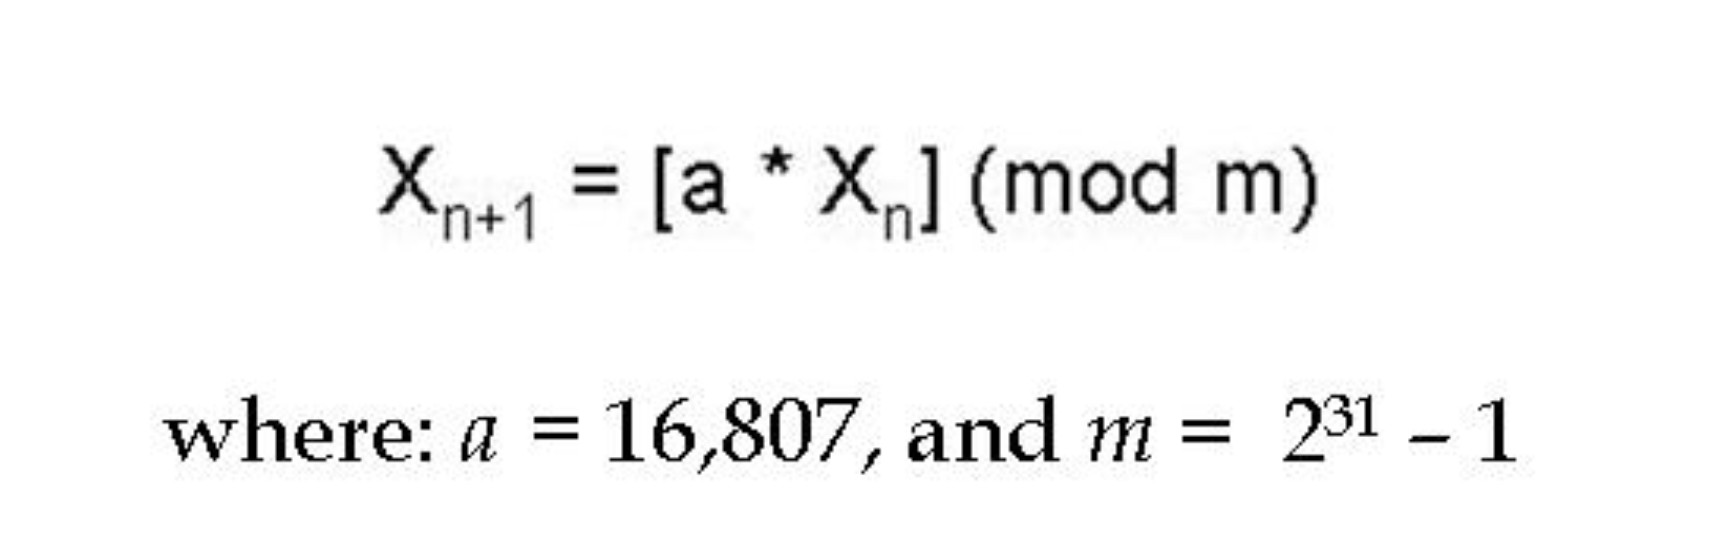 This is the equation for the Schrage random number generator.  The random number upper case X subscript lower case n plus 1 equals lower case a times the nth random number, upper case X subscript lower case n, times mod lower case m, where lower case a equals 16,807 and lower case m equals 2 to the 31st power minus 1.